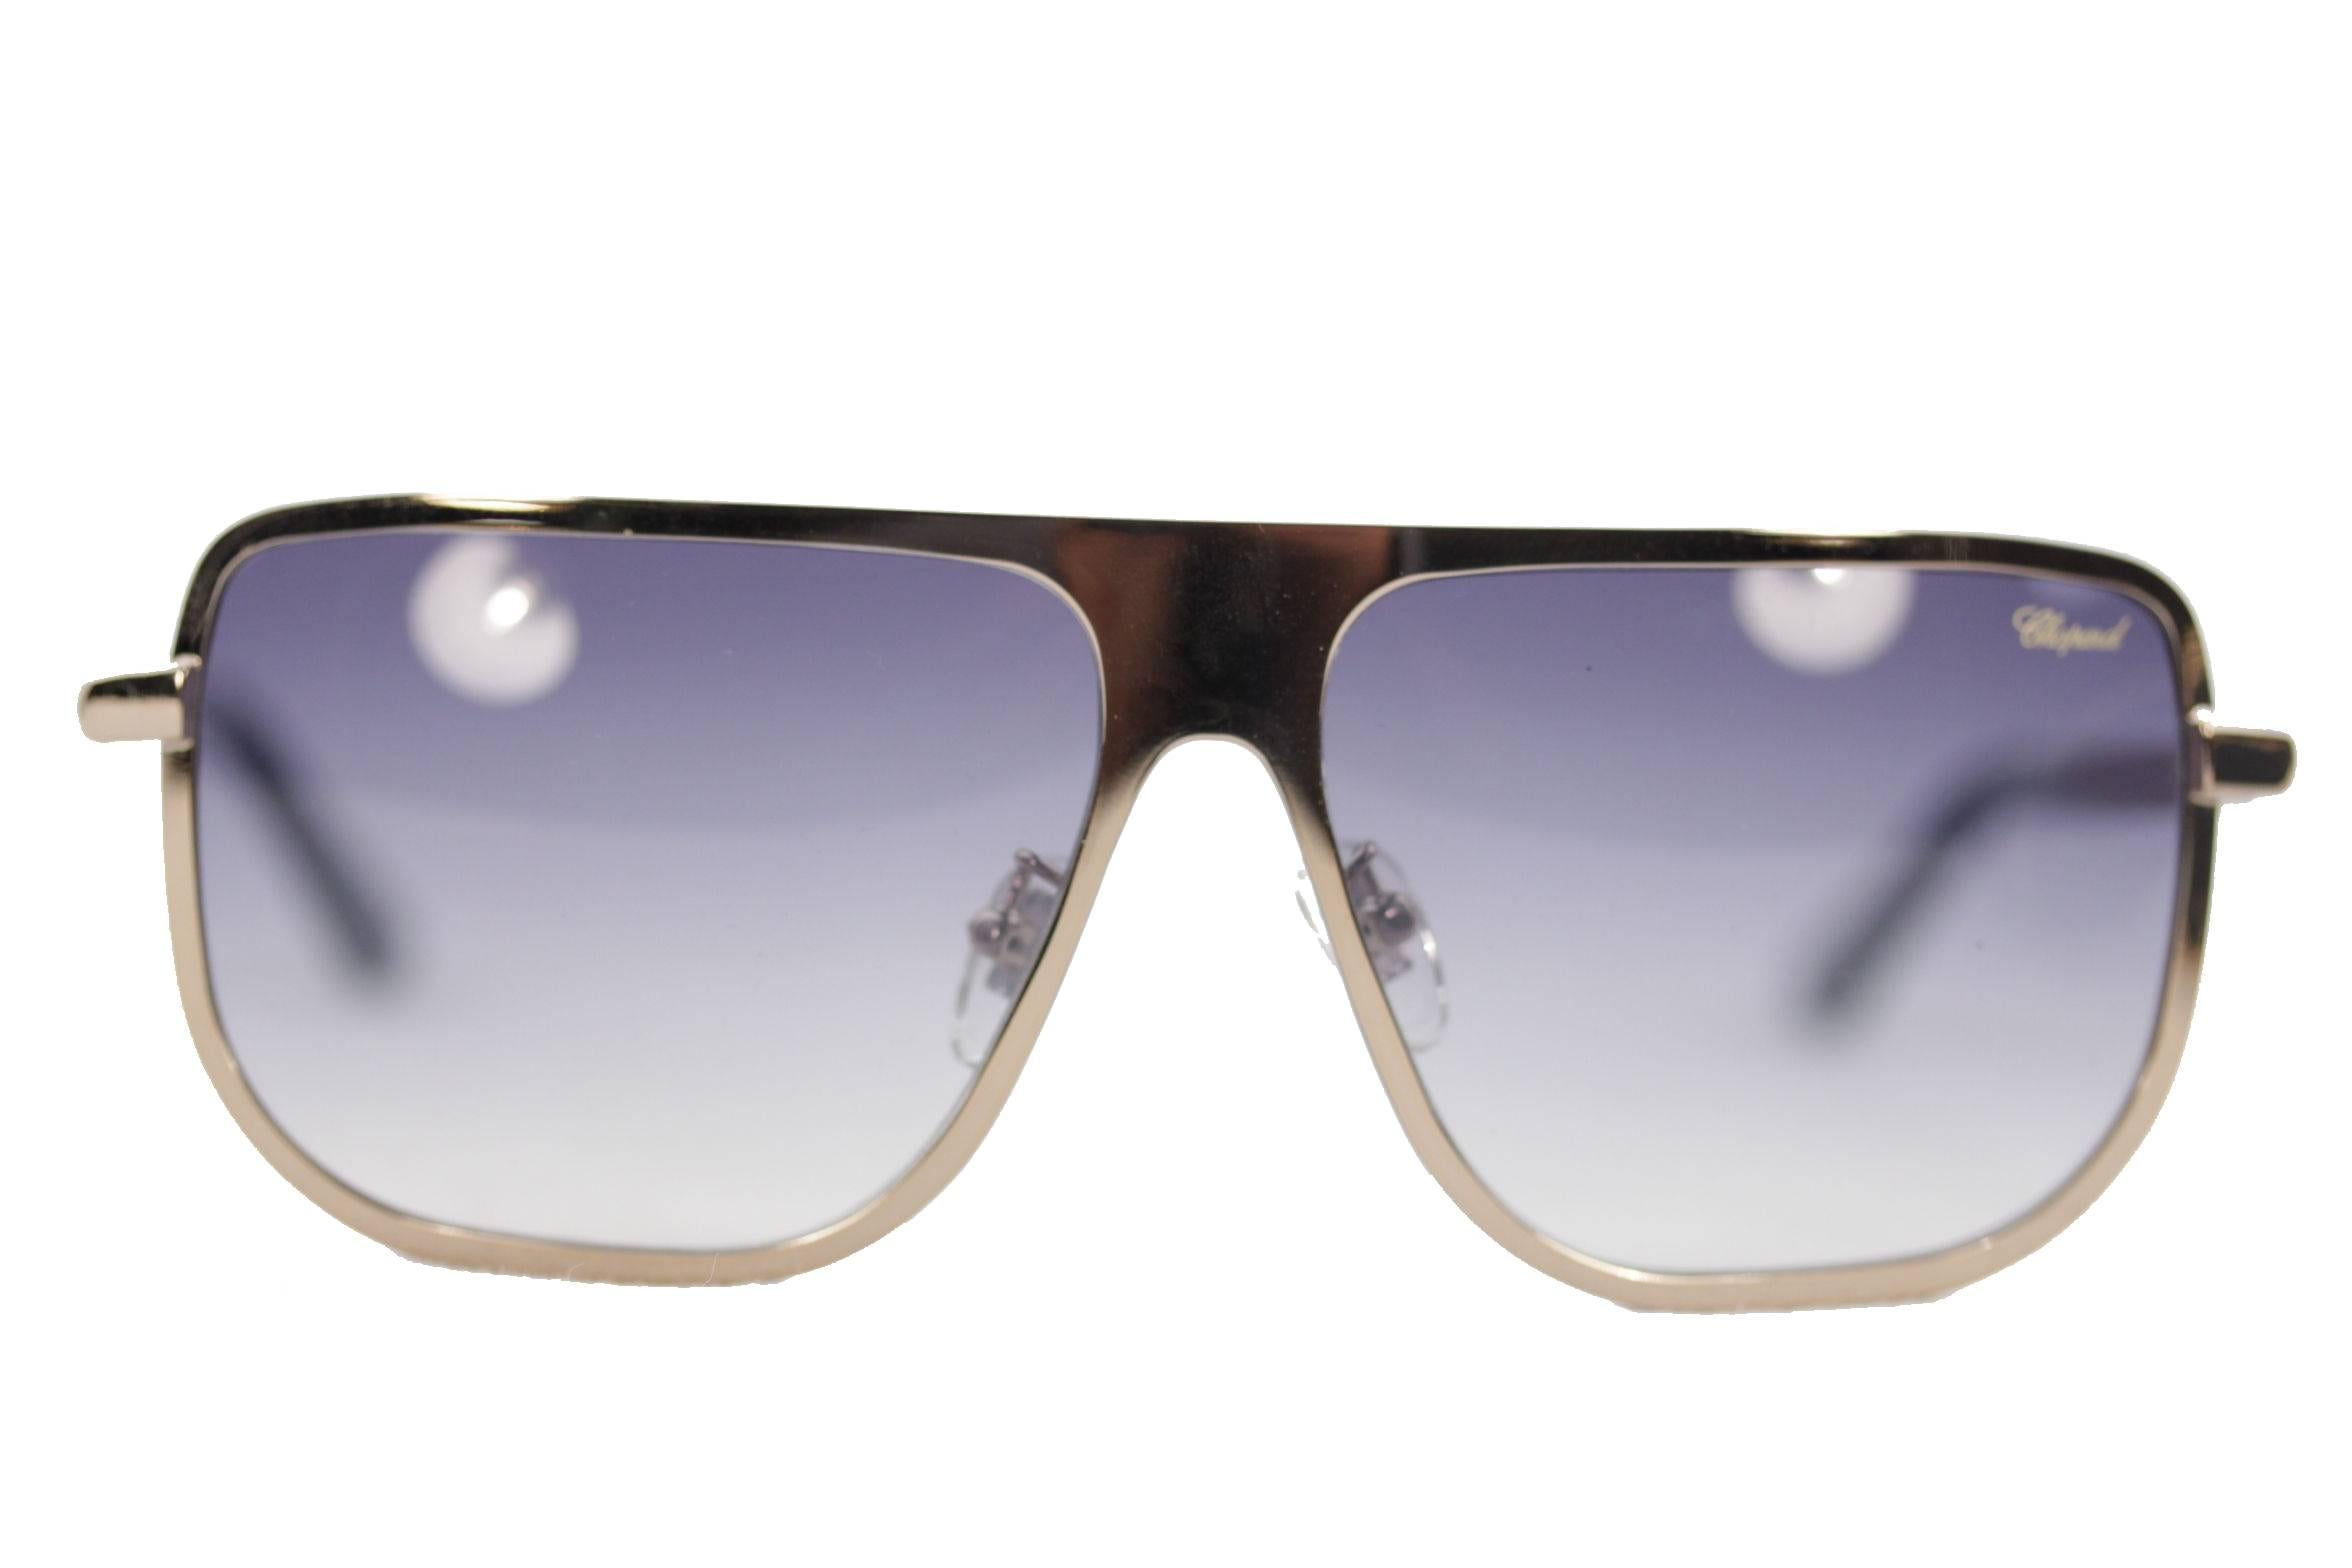 - Splendid sunglasses by CHOPARD

- Silver metal frame - Made in Italy

- Original gradient blue lenses (CHOPARD signature on left lenses)

- They will come with their original CHOPARD hardcase

Condition rate & details (please read our